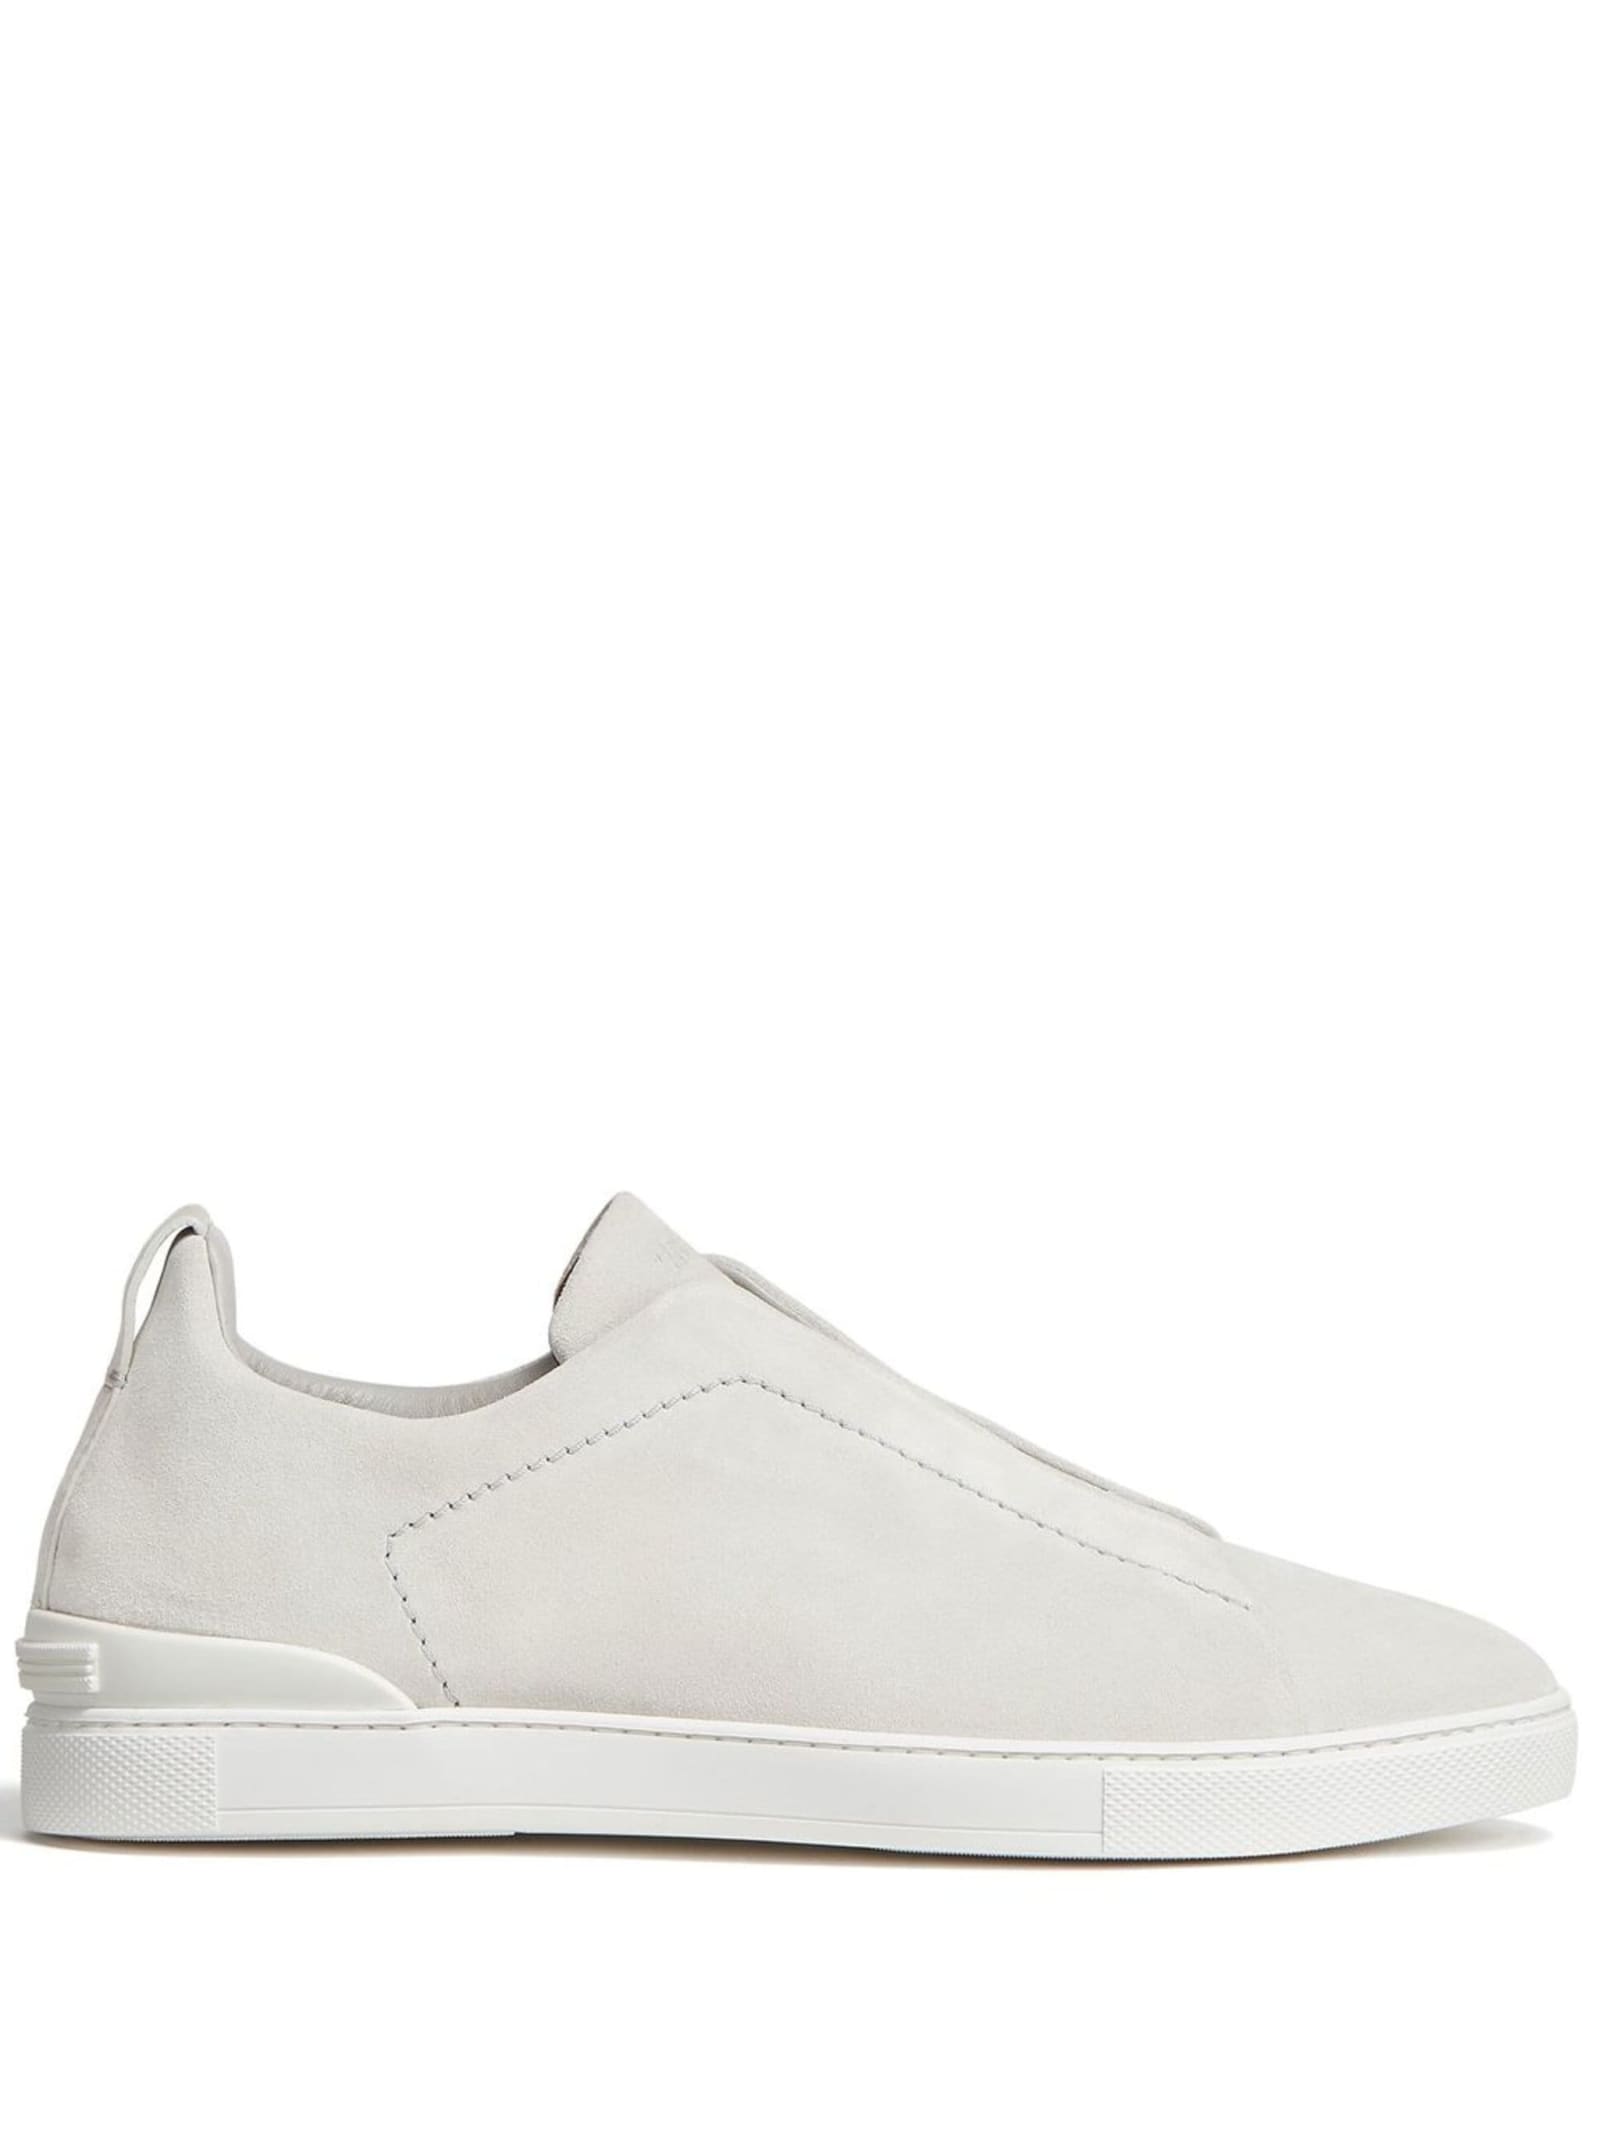 Zegna Triple Stitch Sneakers In White Suede